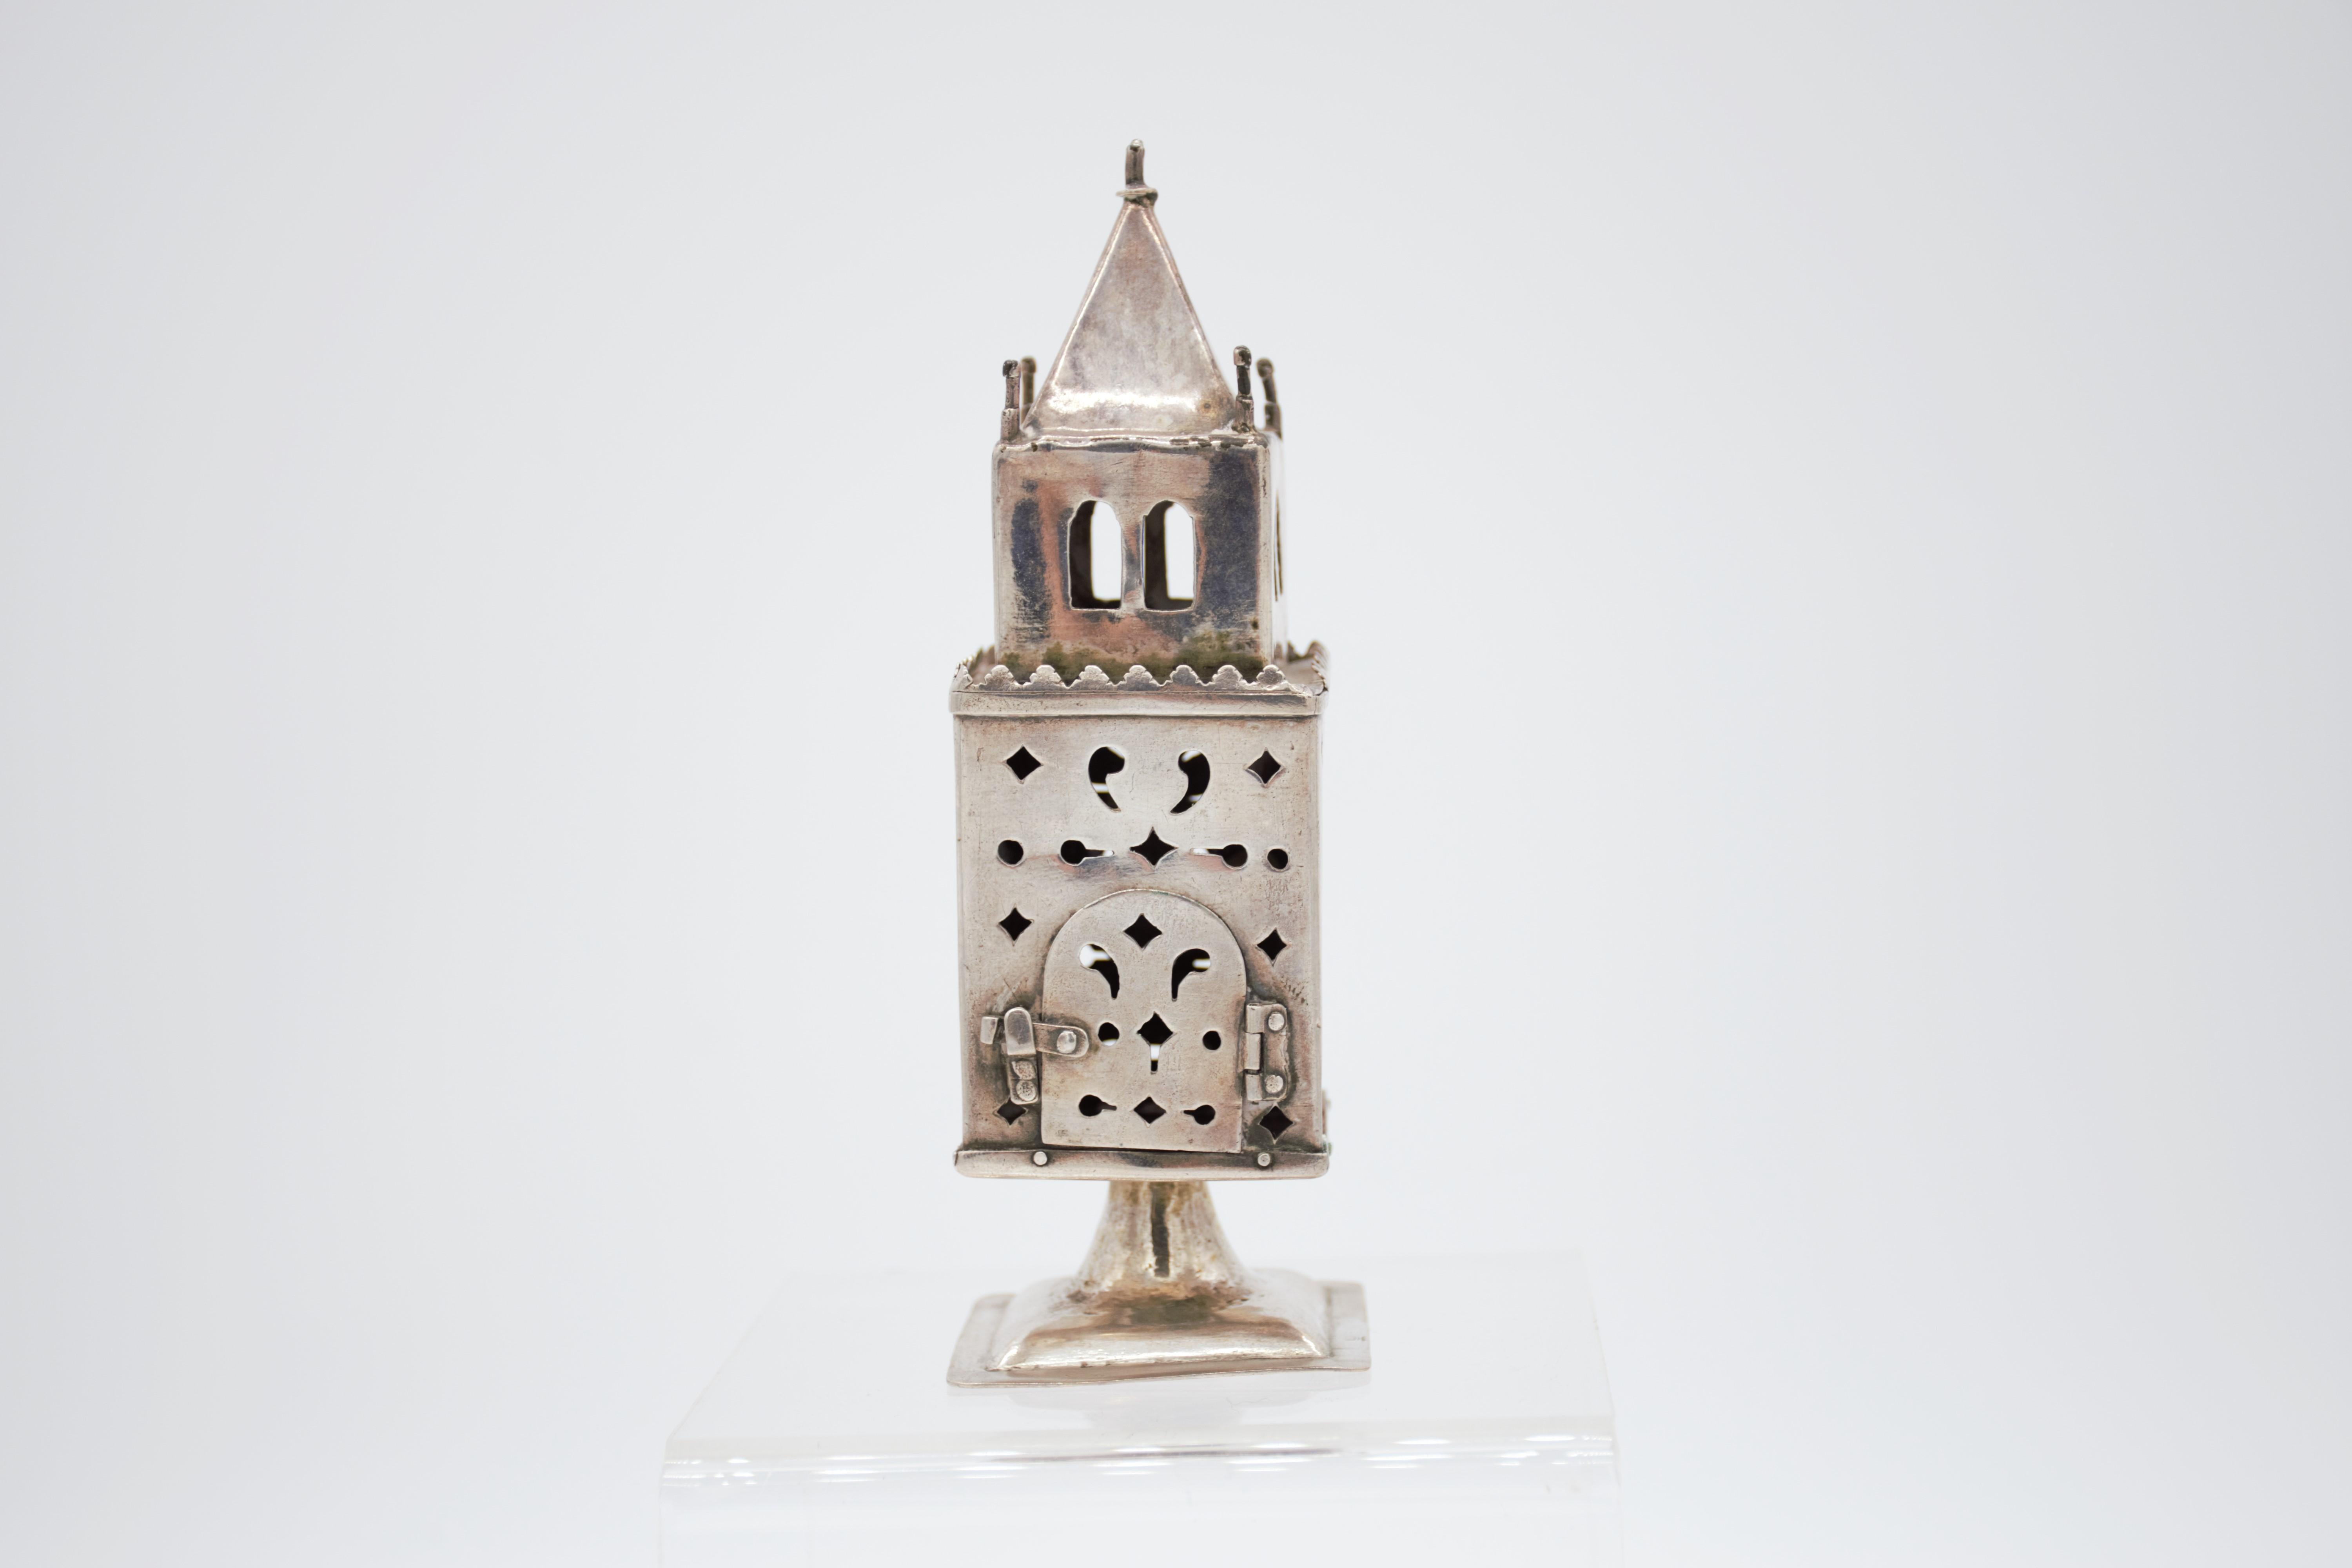 One of the earliest spice towers we could find, it is very rare to see judaica 
from the 17th century, and this 1690s spice tower is super scarce, a true gem of Baroque silver and baroque JUDAICA.  the marks are very worn and also the engraved work